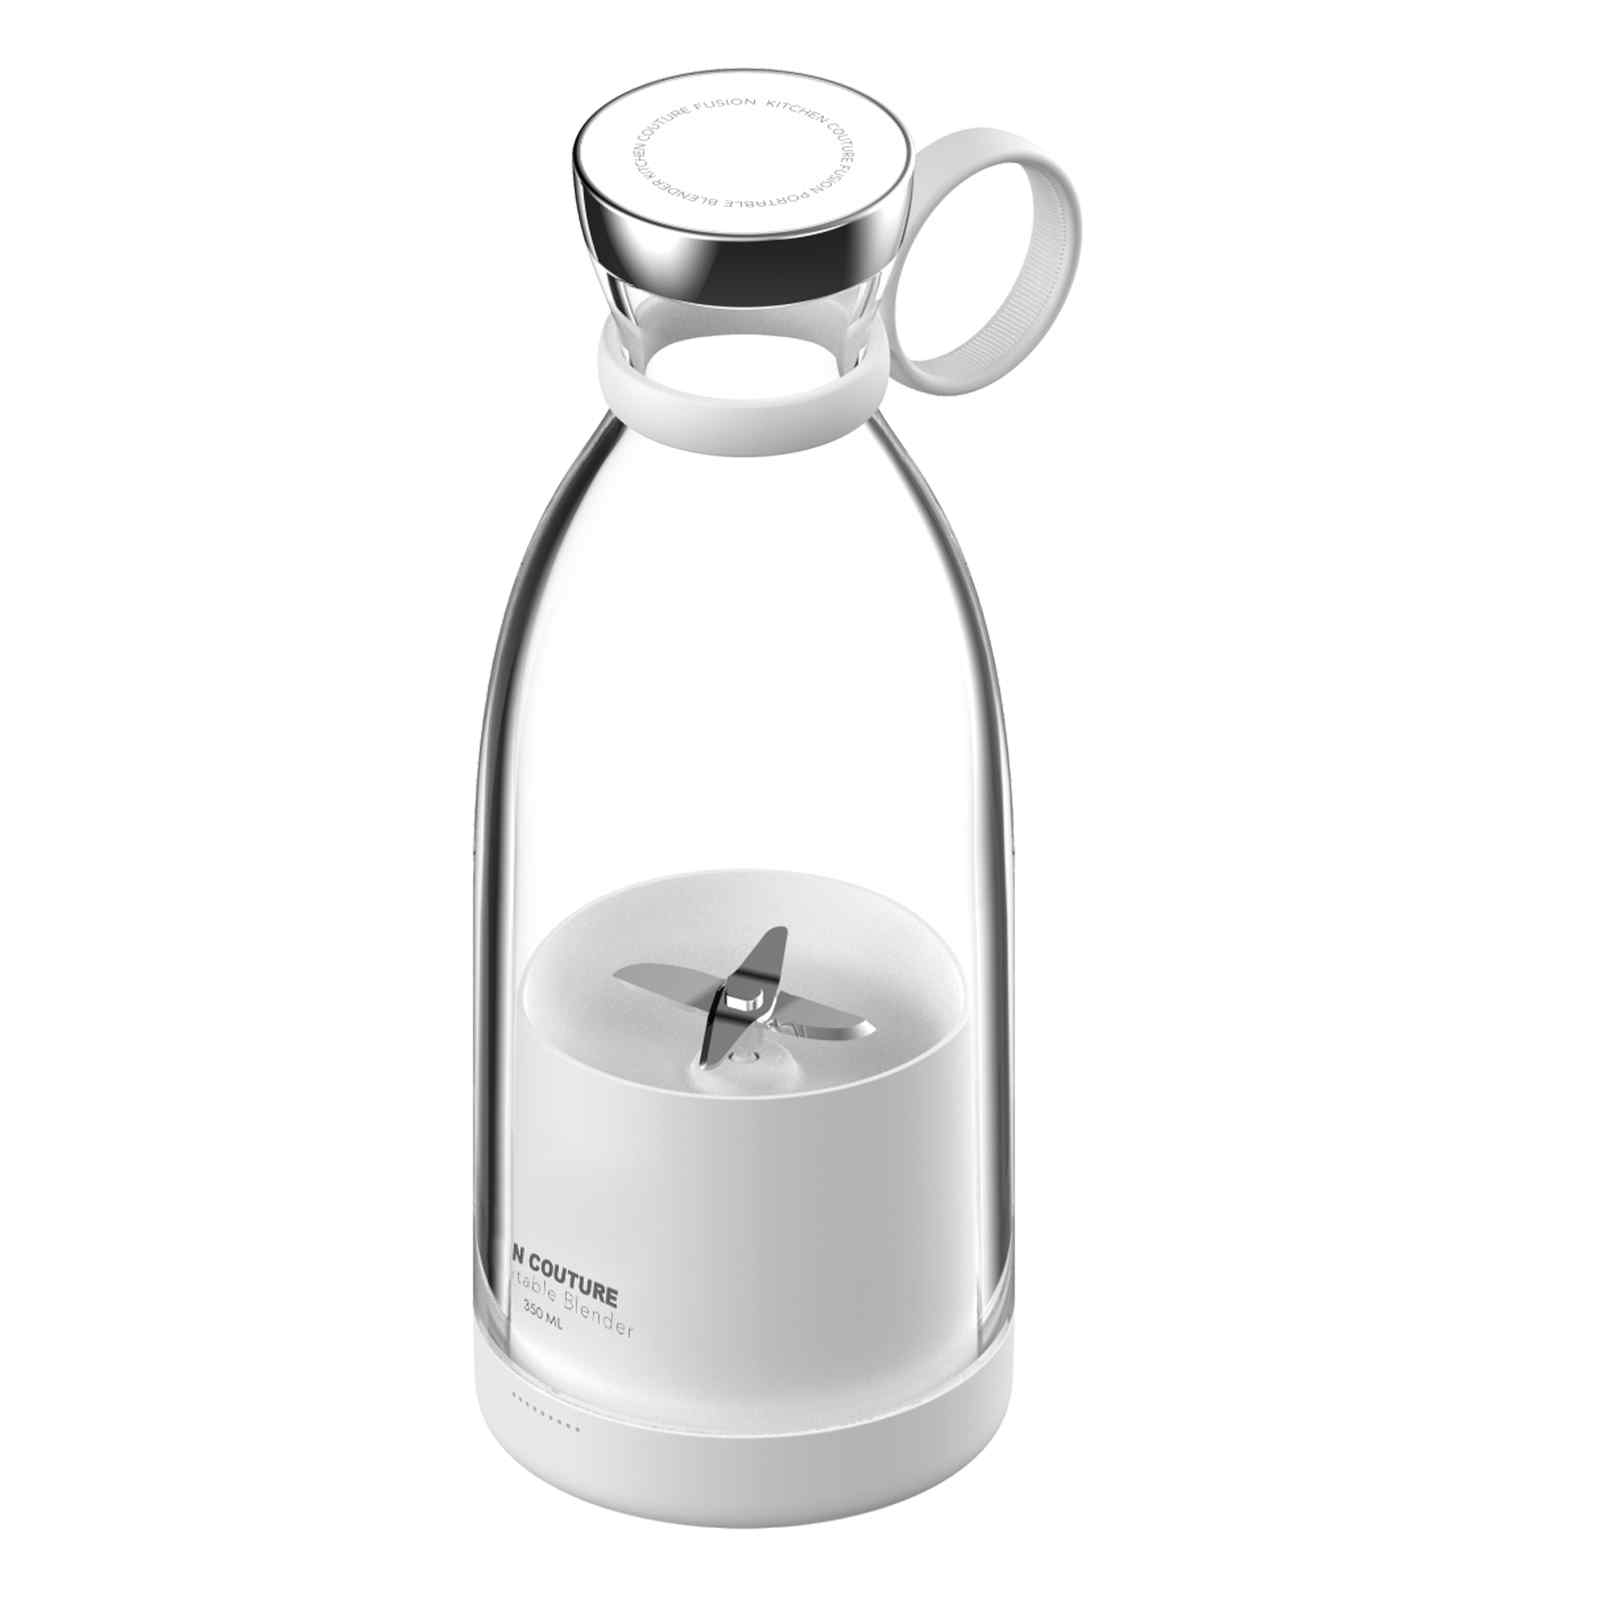 Kitchen Couture Fusion Portable Blender Electric Hand Held Mixer Shaker Maker